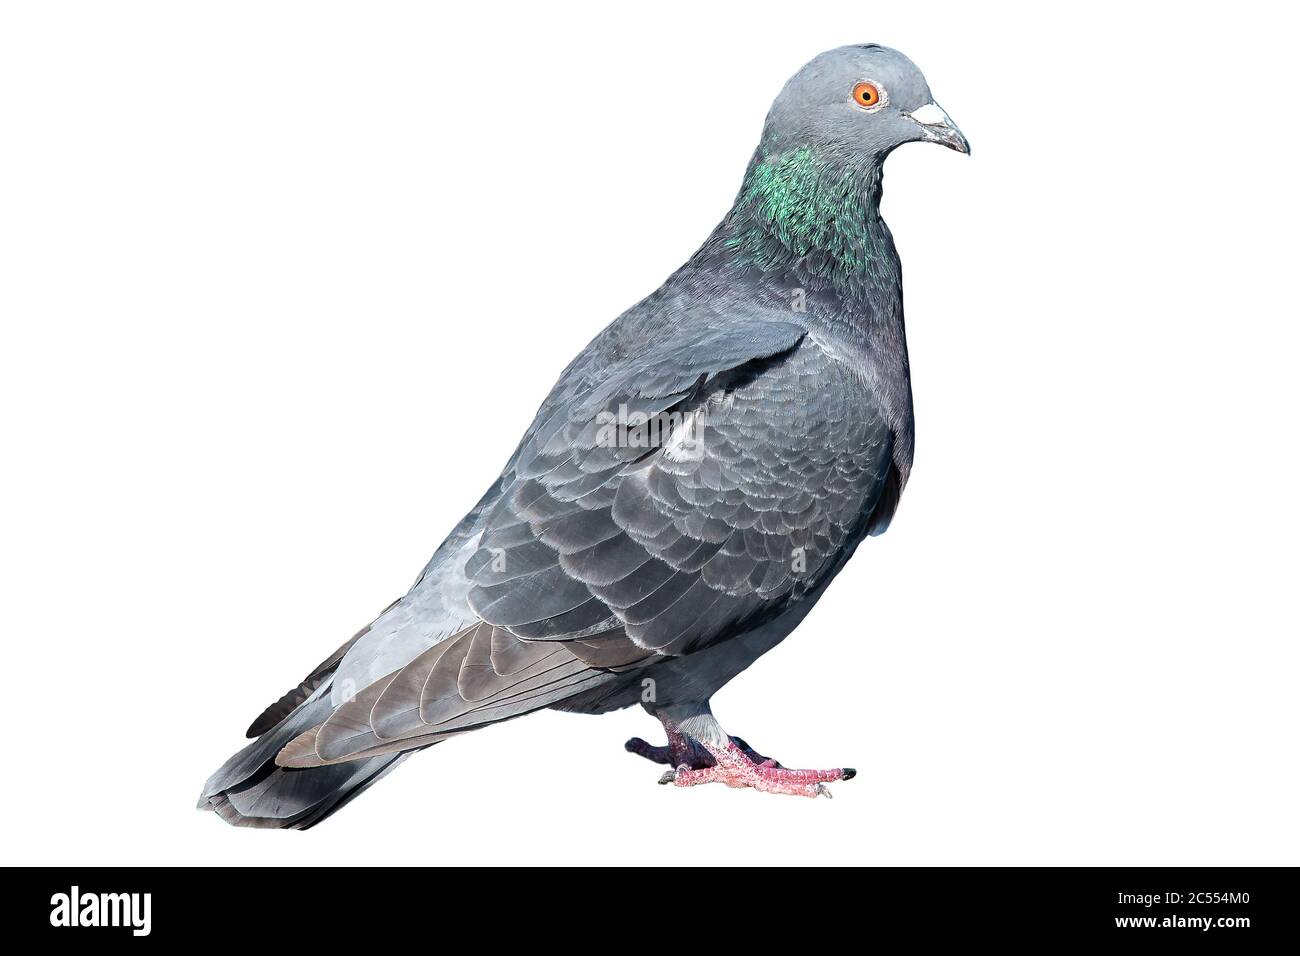 Pigeon isolated on white background. Grey dove body portrait. wildlife of gray birdie. Concept of freedom elegance, faith and hope. close up photograp Stock Photo